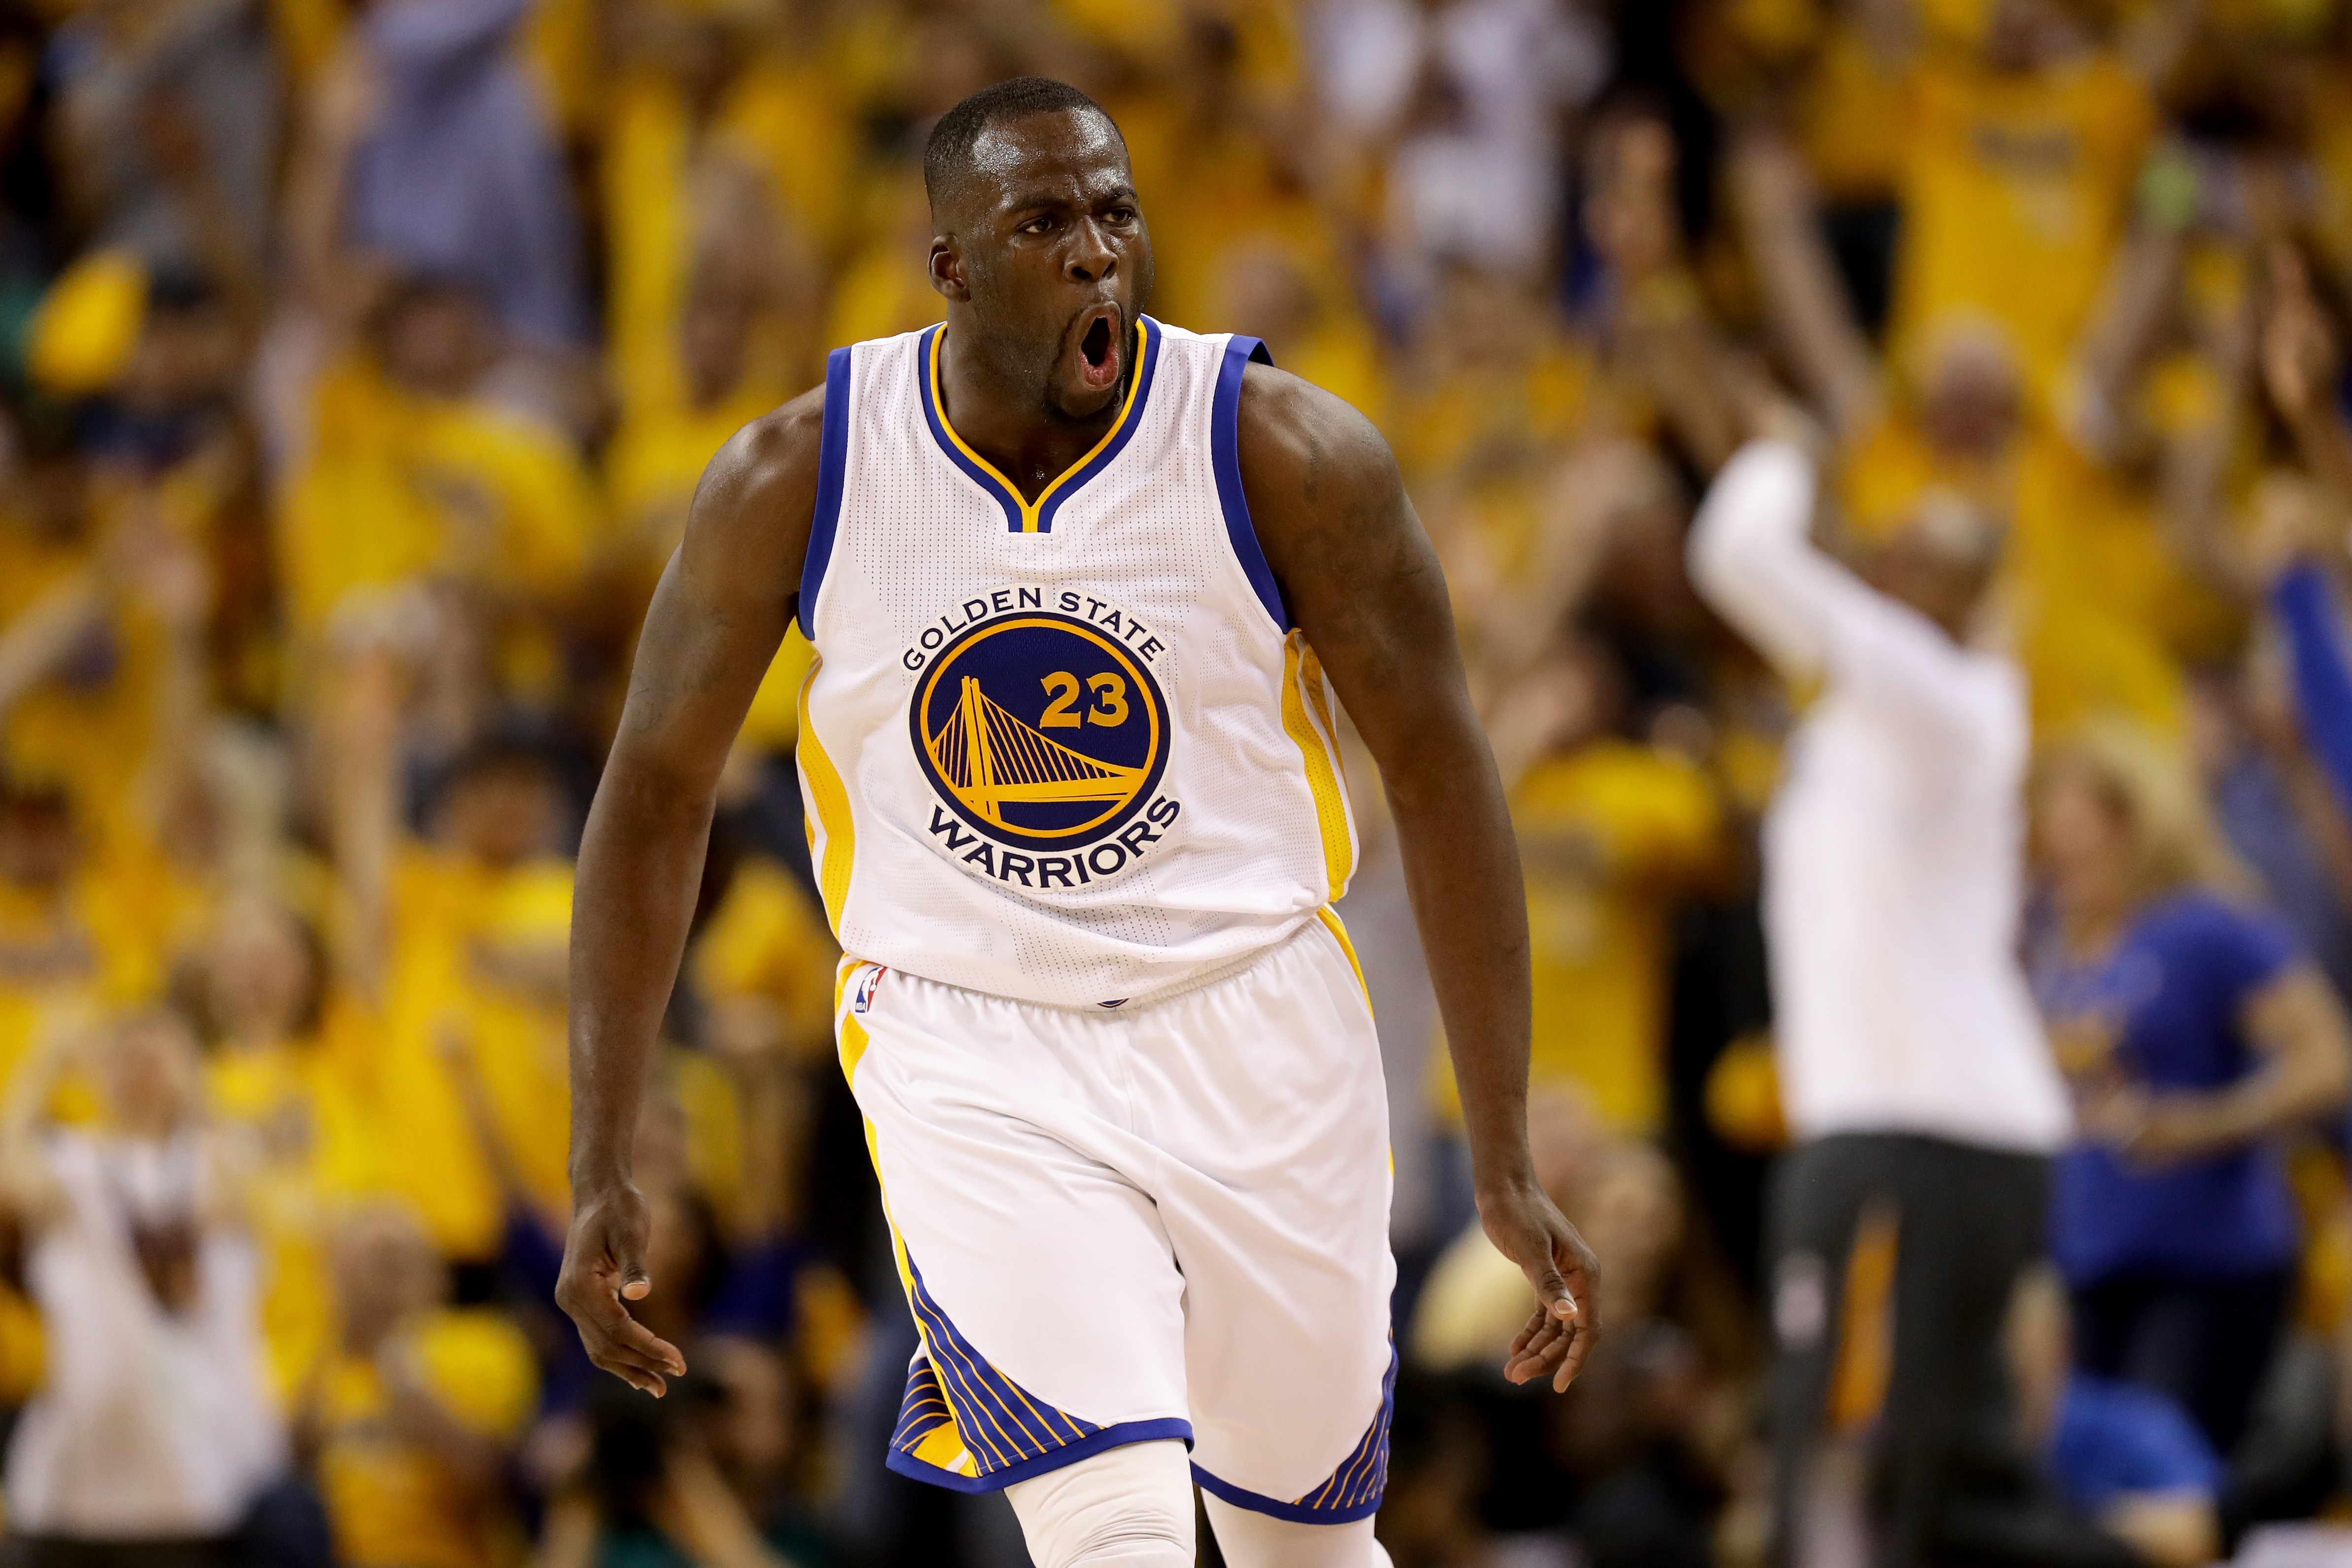 OAKLAND, CA - JUNE 05: Draymond Green #23 of the Golden State Warriors reacts in the second quarter of Game 2 of the 2016 NBA Finals against the Cleveland Cavaliers at ORACLE Arena on June 5, 2016 in Oakland, California. NOTE TO USER: User expressly acknowledges and agrees that, by downloading and or using this photograph, User is consenting to the terms and conditions of the Getty Images License Agreement.   Ezra Shaw/Getty Images/AFP